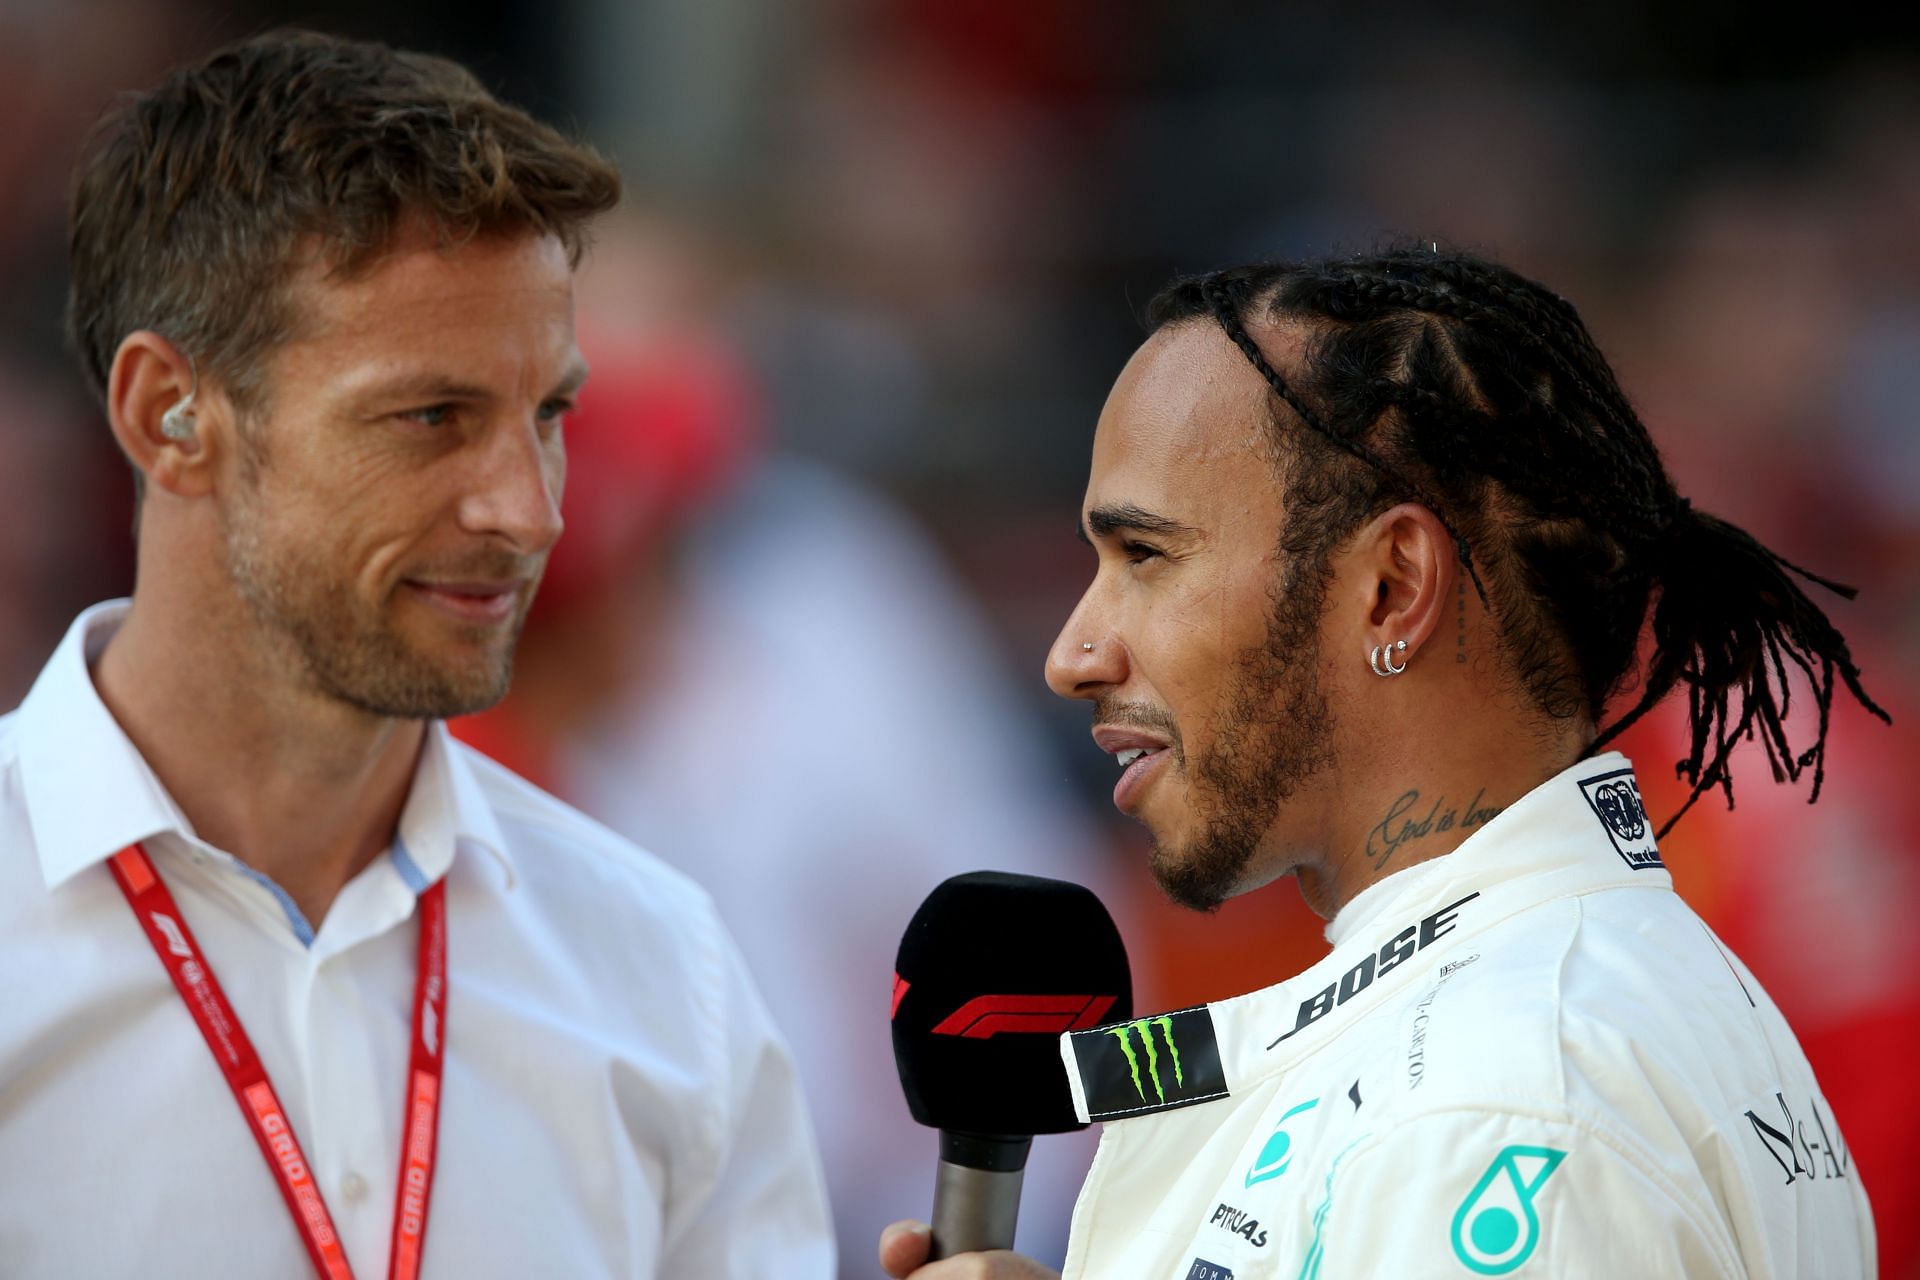 Jenson Button (left) with Lewis Hamilton during F1 Grand Prix of Russia - Qualifying